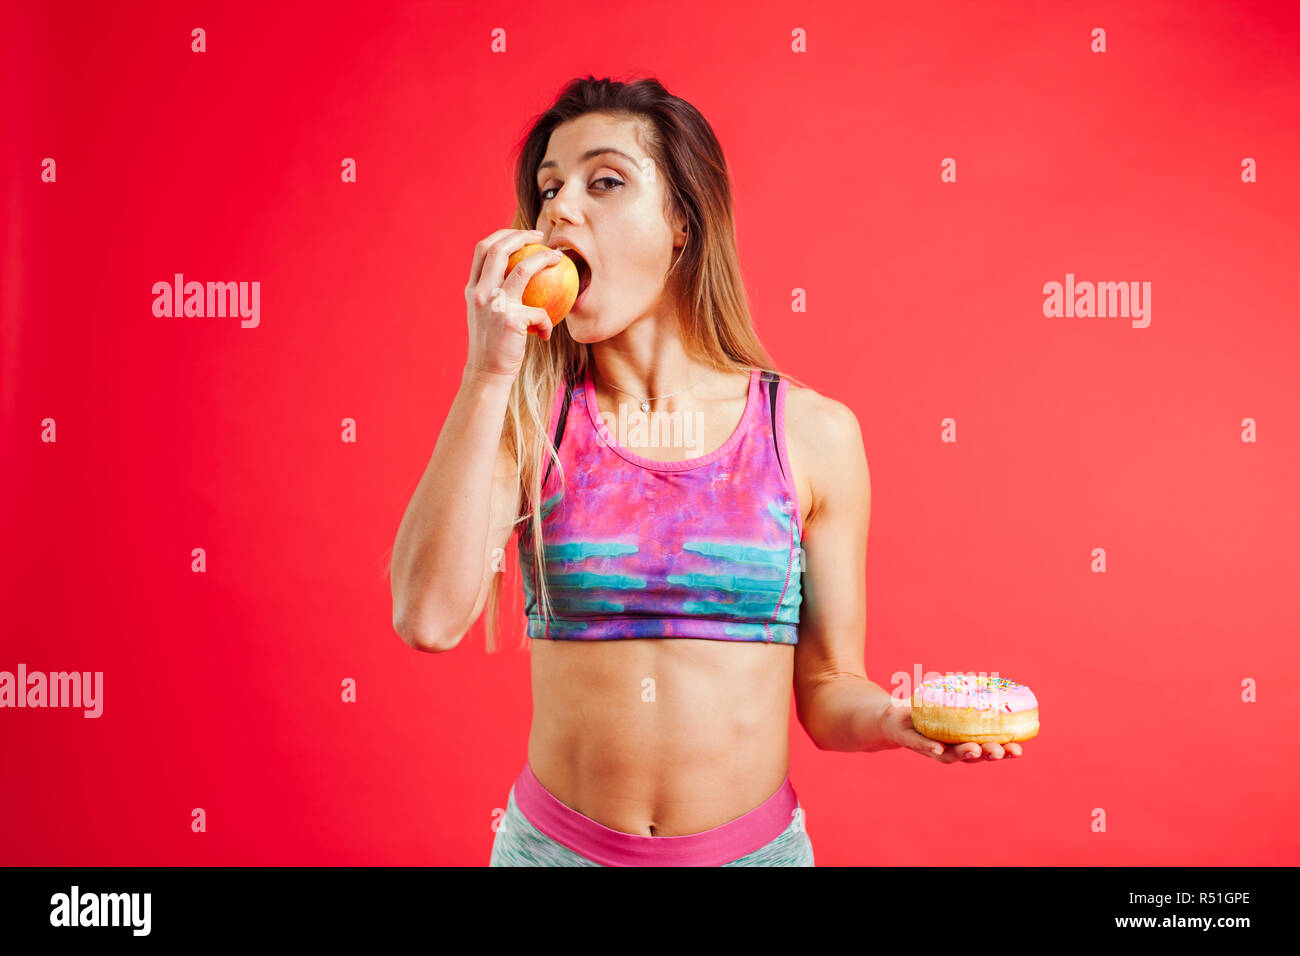 Portrait of a young woman choosing between  appel and a donut isolated over white background Stock Photo